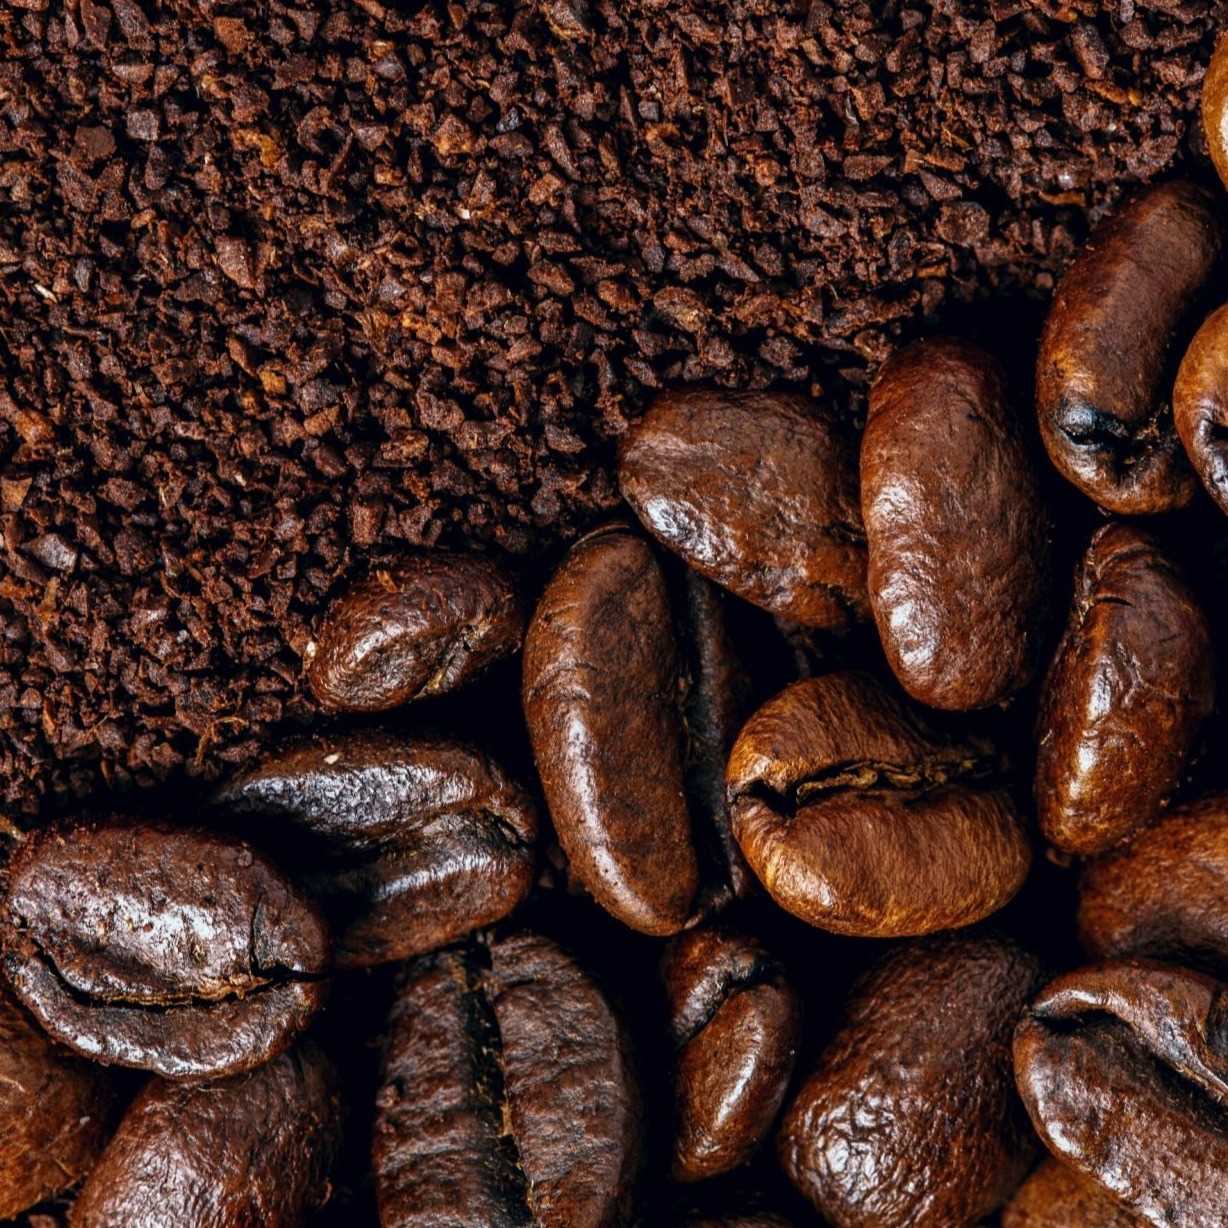 I AM LOOKING FOR COFFEE BEANS TO RUSSIA